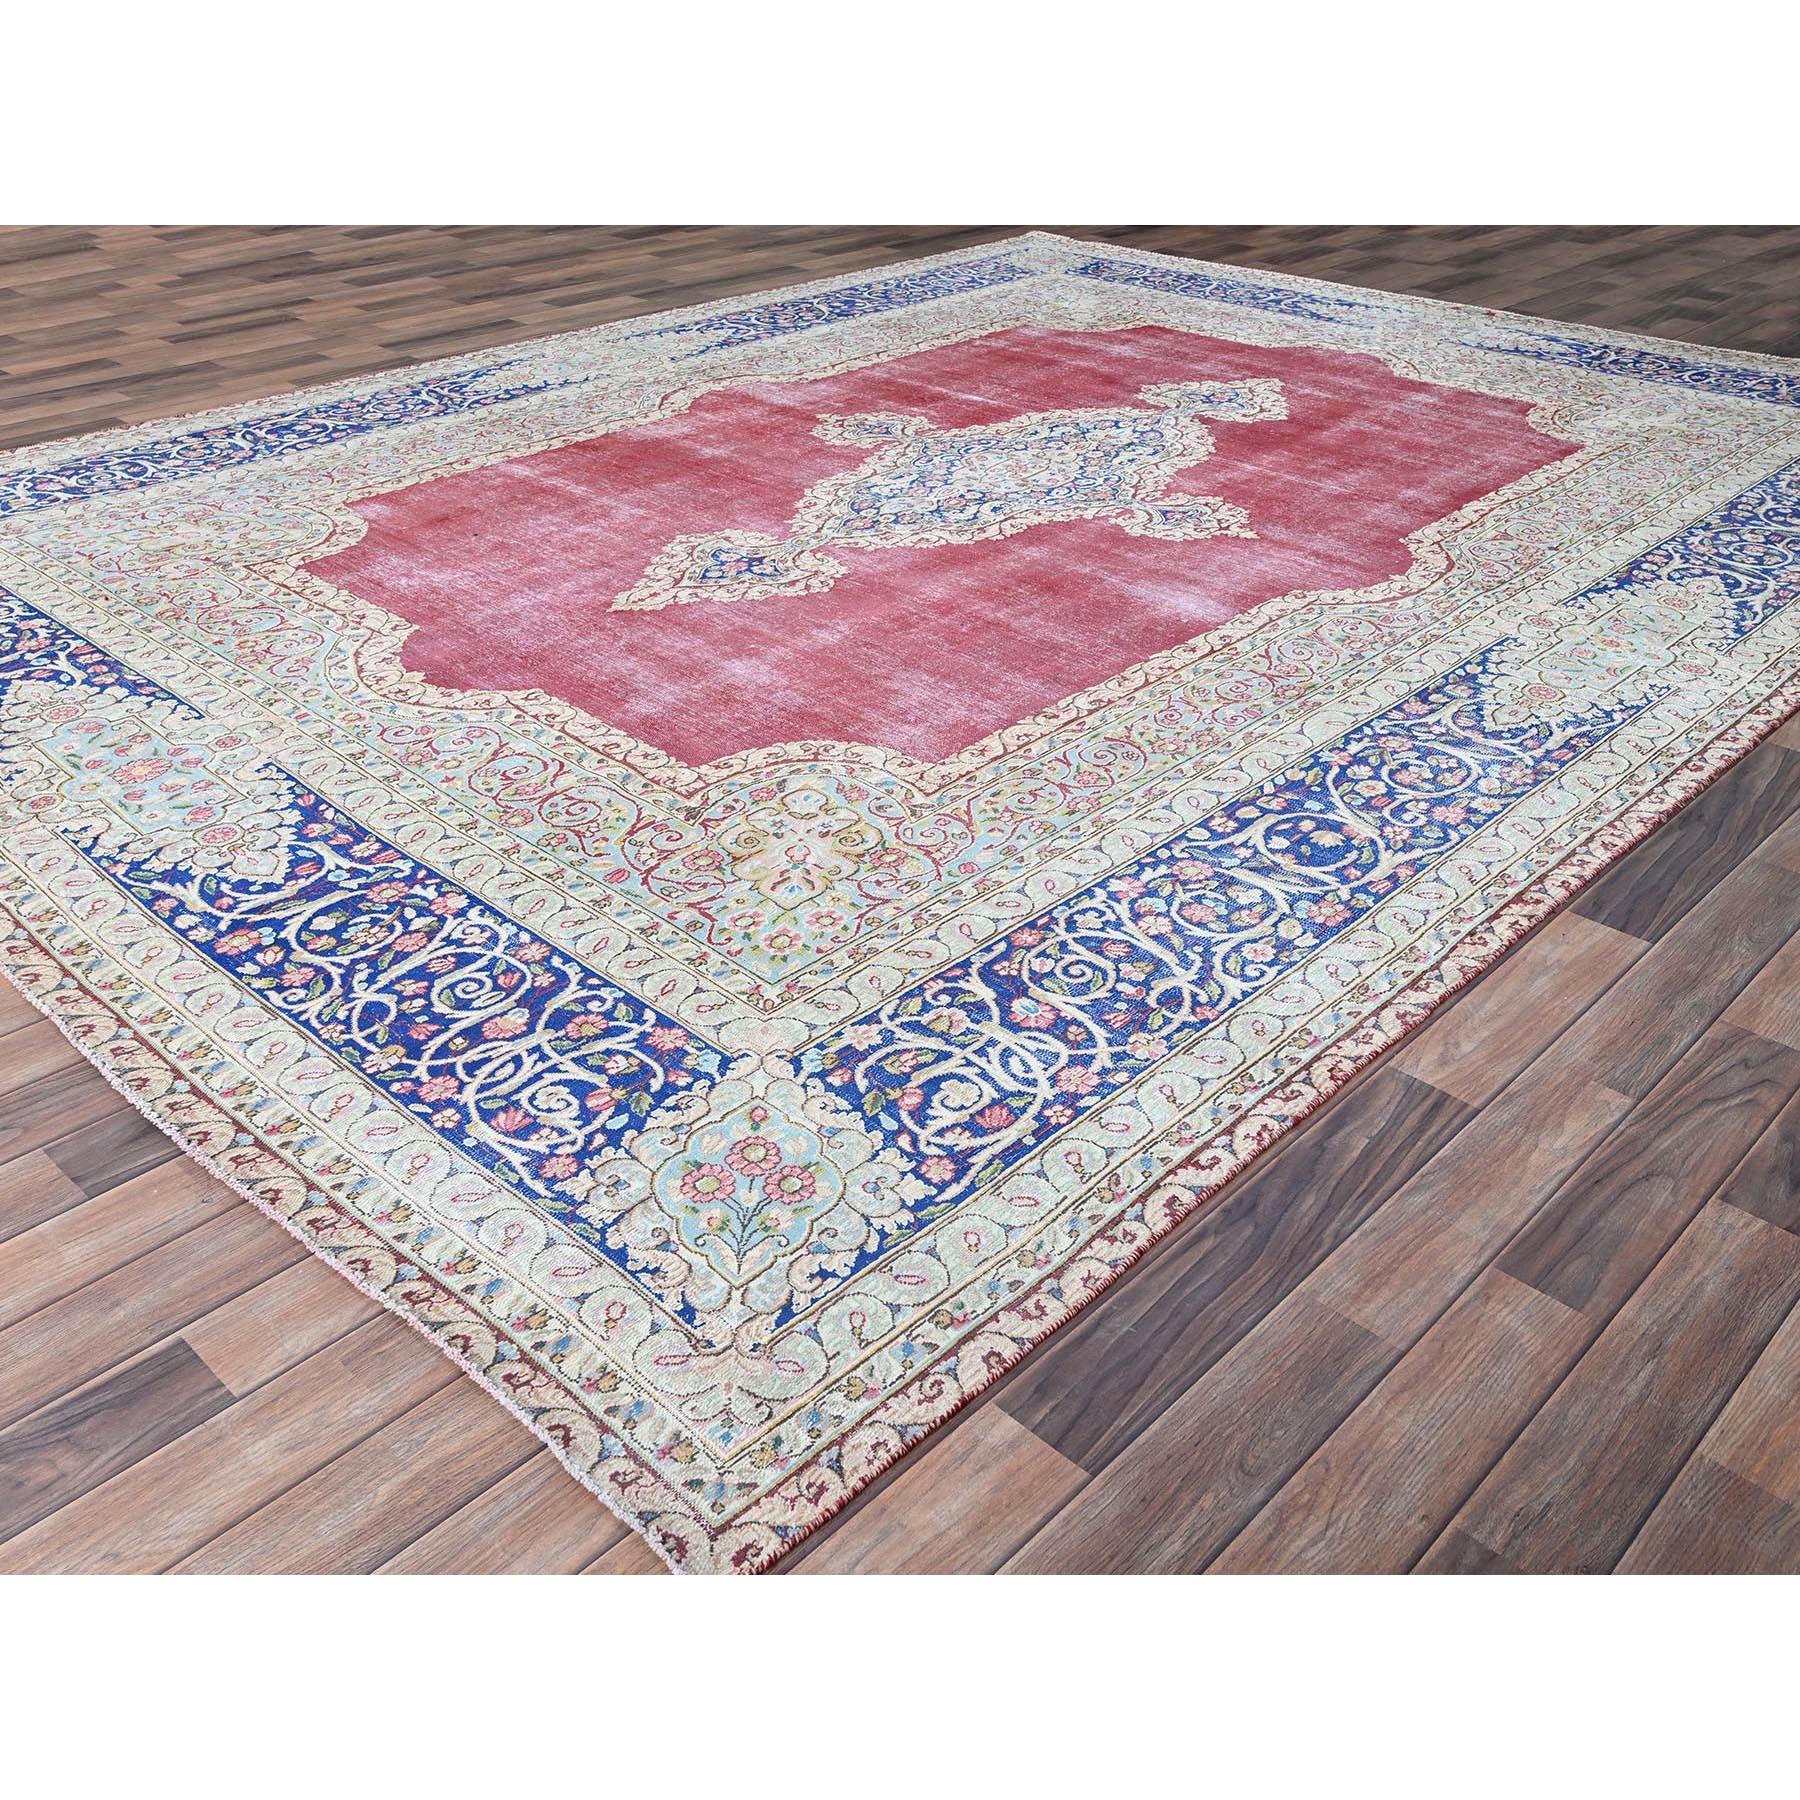 Red Vintage Persian Kerman Abrash Clean Hand Knotted Pure Wool Rustic Feel Rug In Good Condition For Sale In Carlstadt, NJ